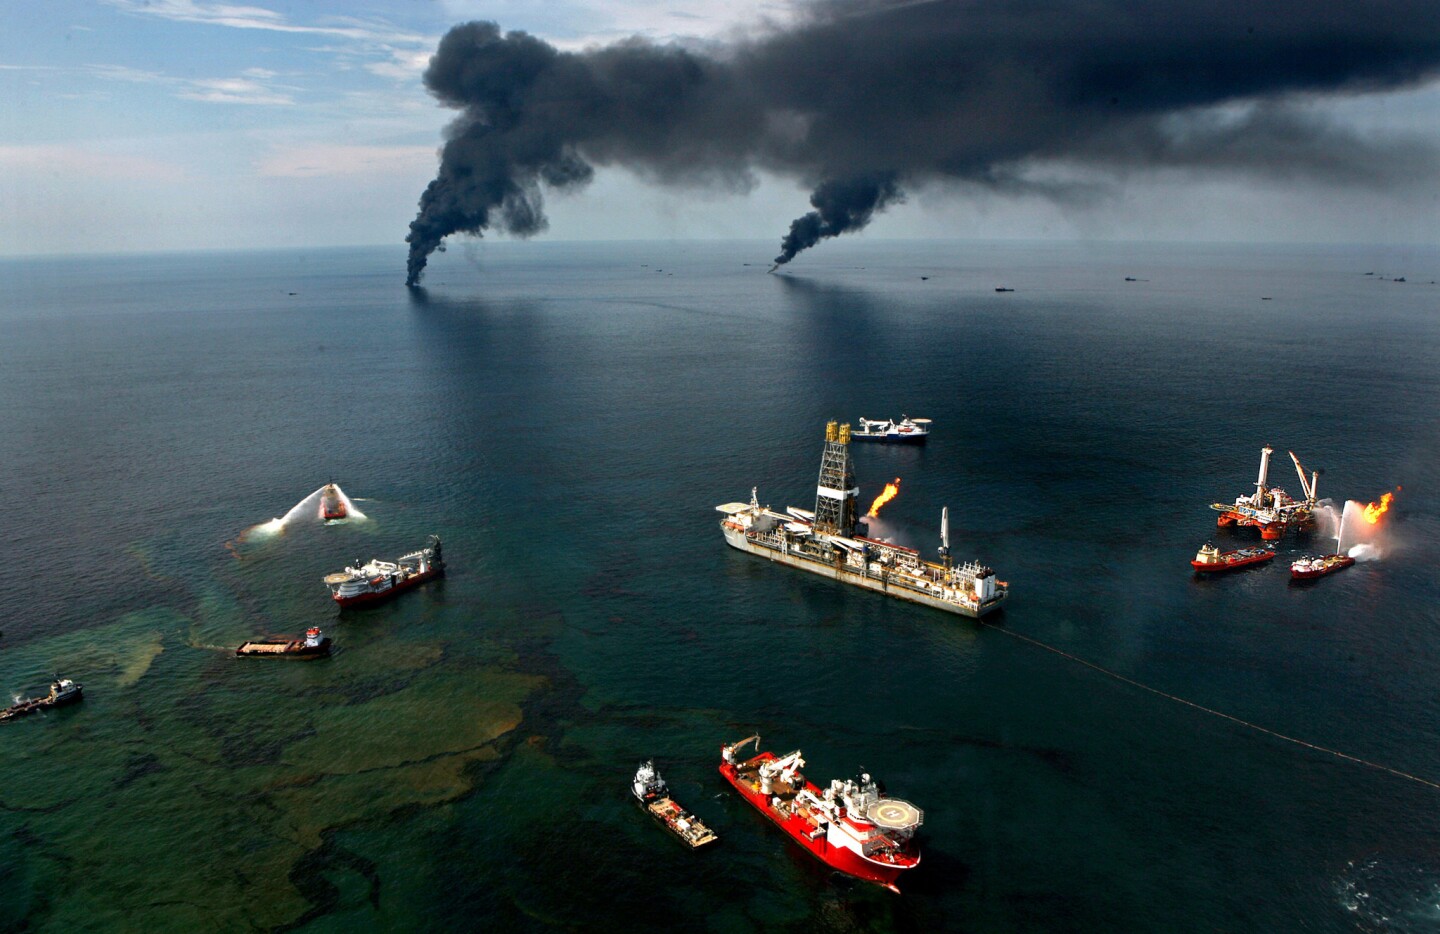 Fires burn around the BP Deepwater Horizon oil rig in the Gulf of Mexico in 2010. During the huge spill off the Louisiana coast, Subra joined with the Louisiana Environmental Action Network to prepare for oil reaching land.